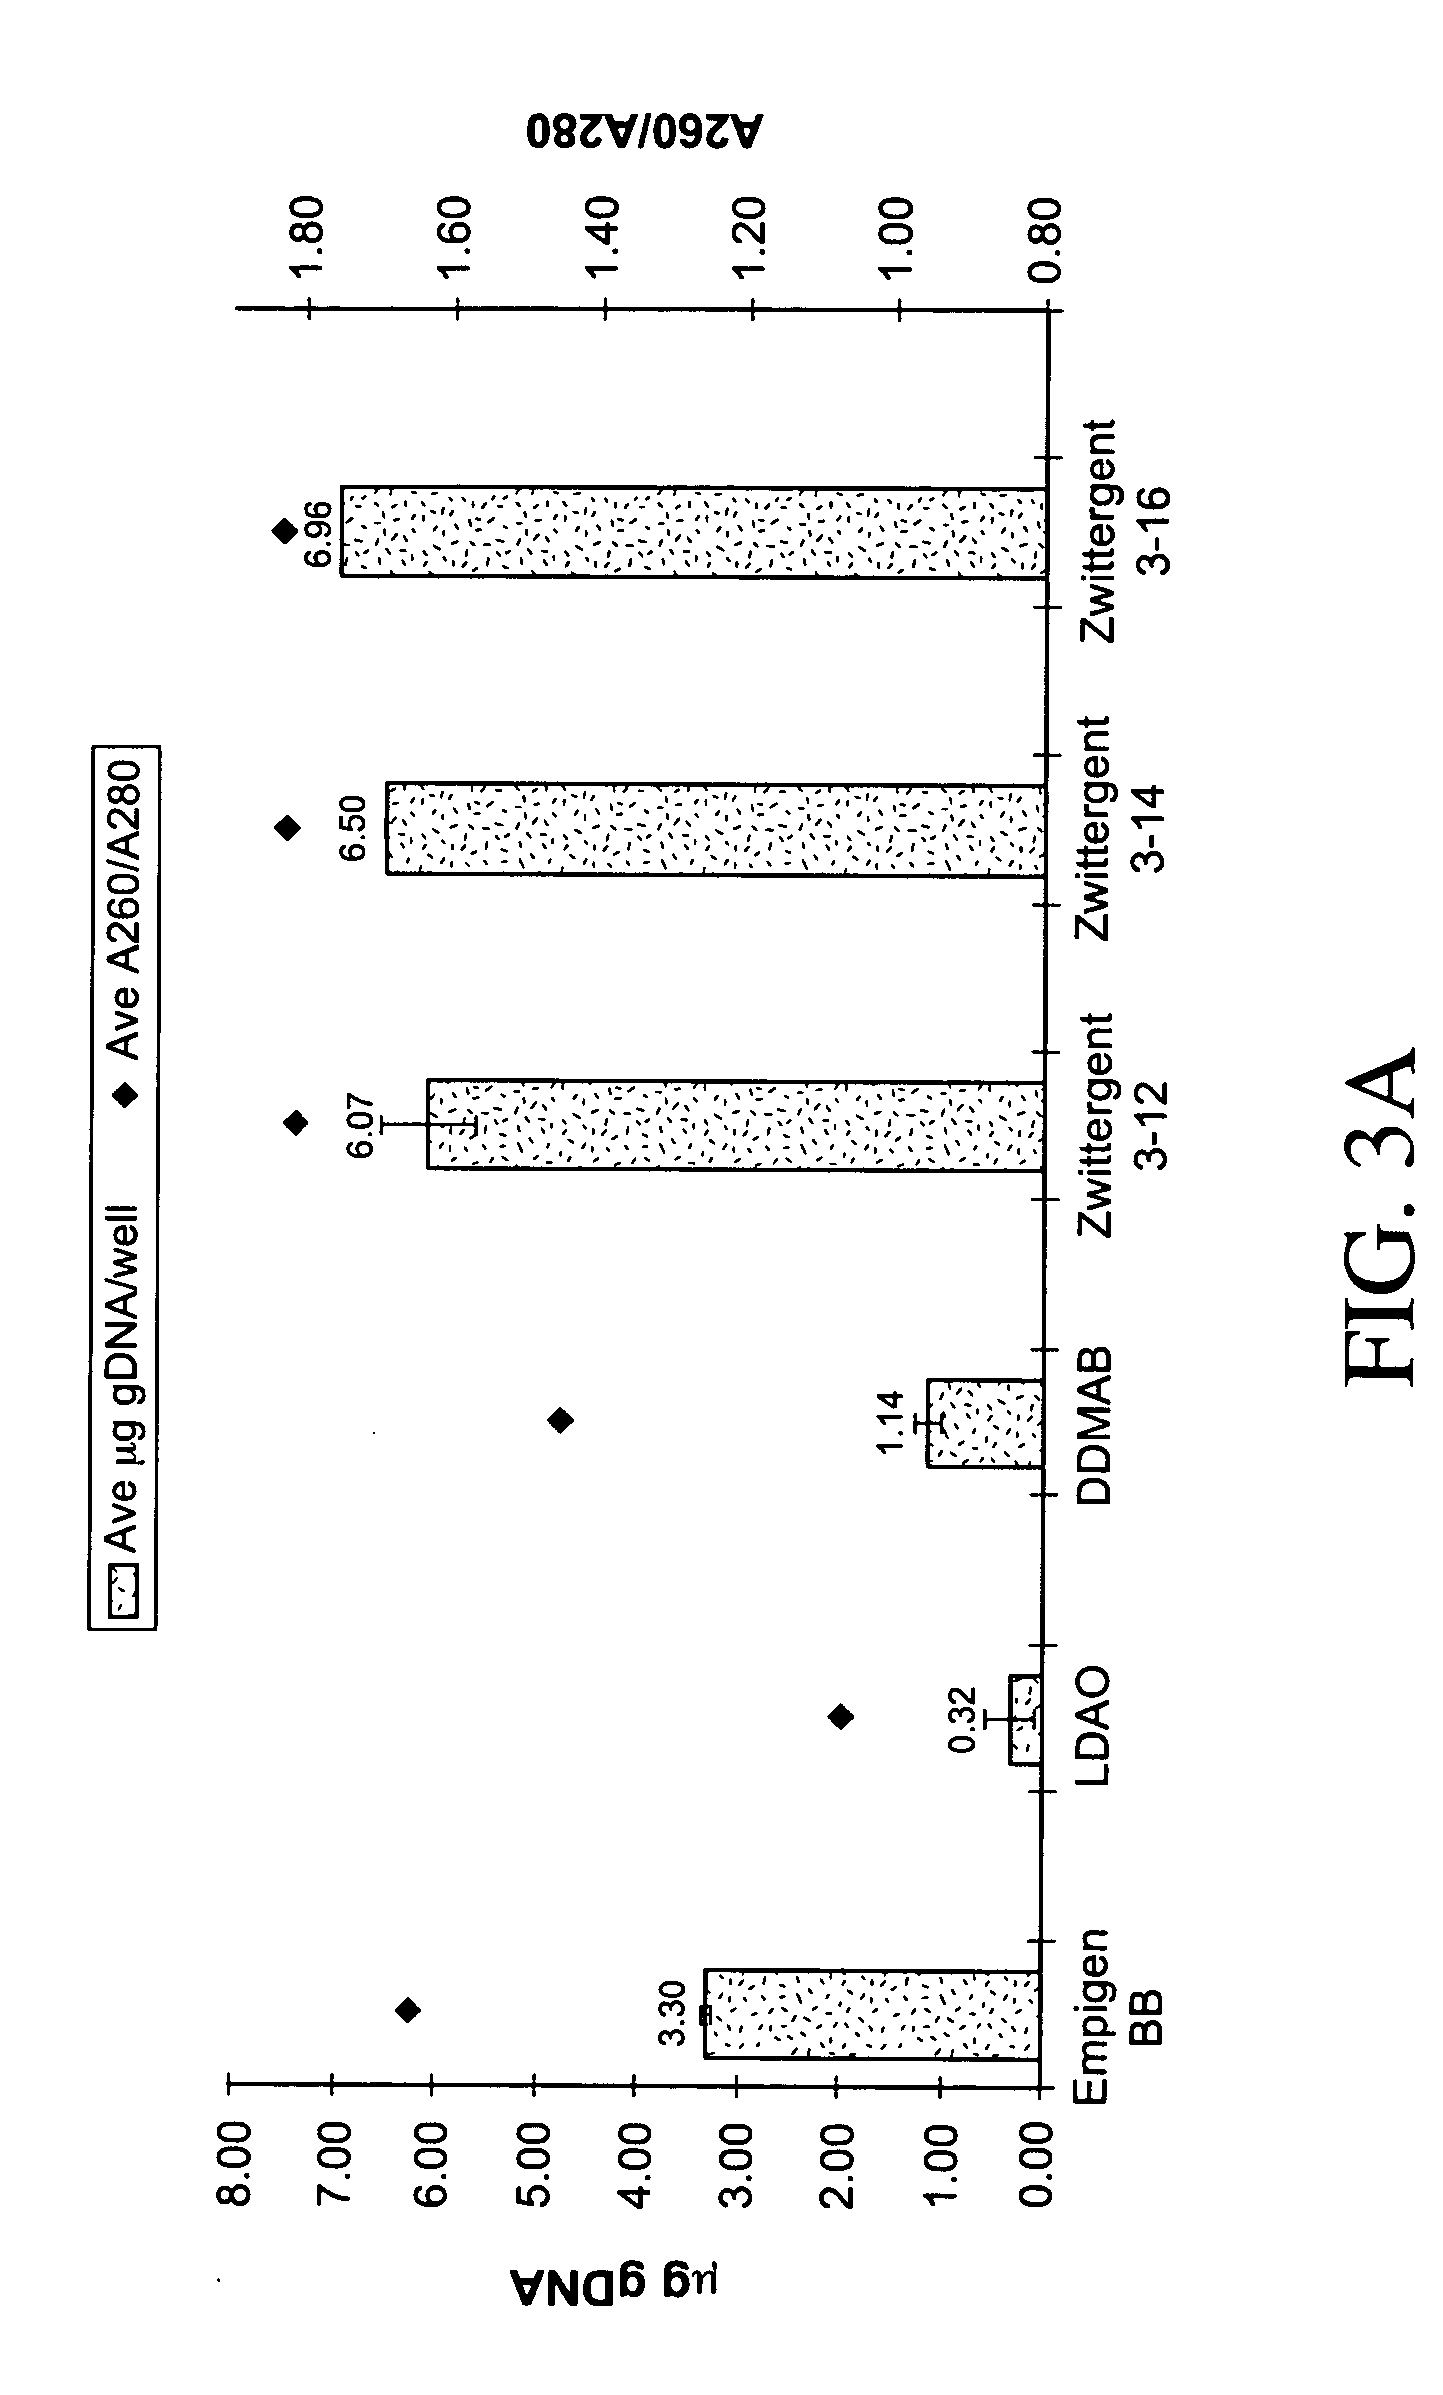 Methods and kits for obtaining nucleic acid from biological samples